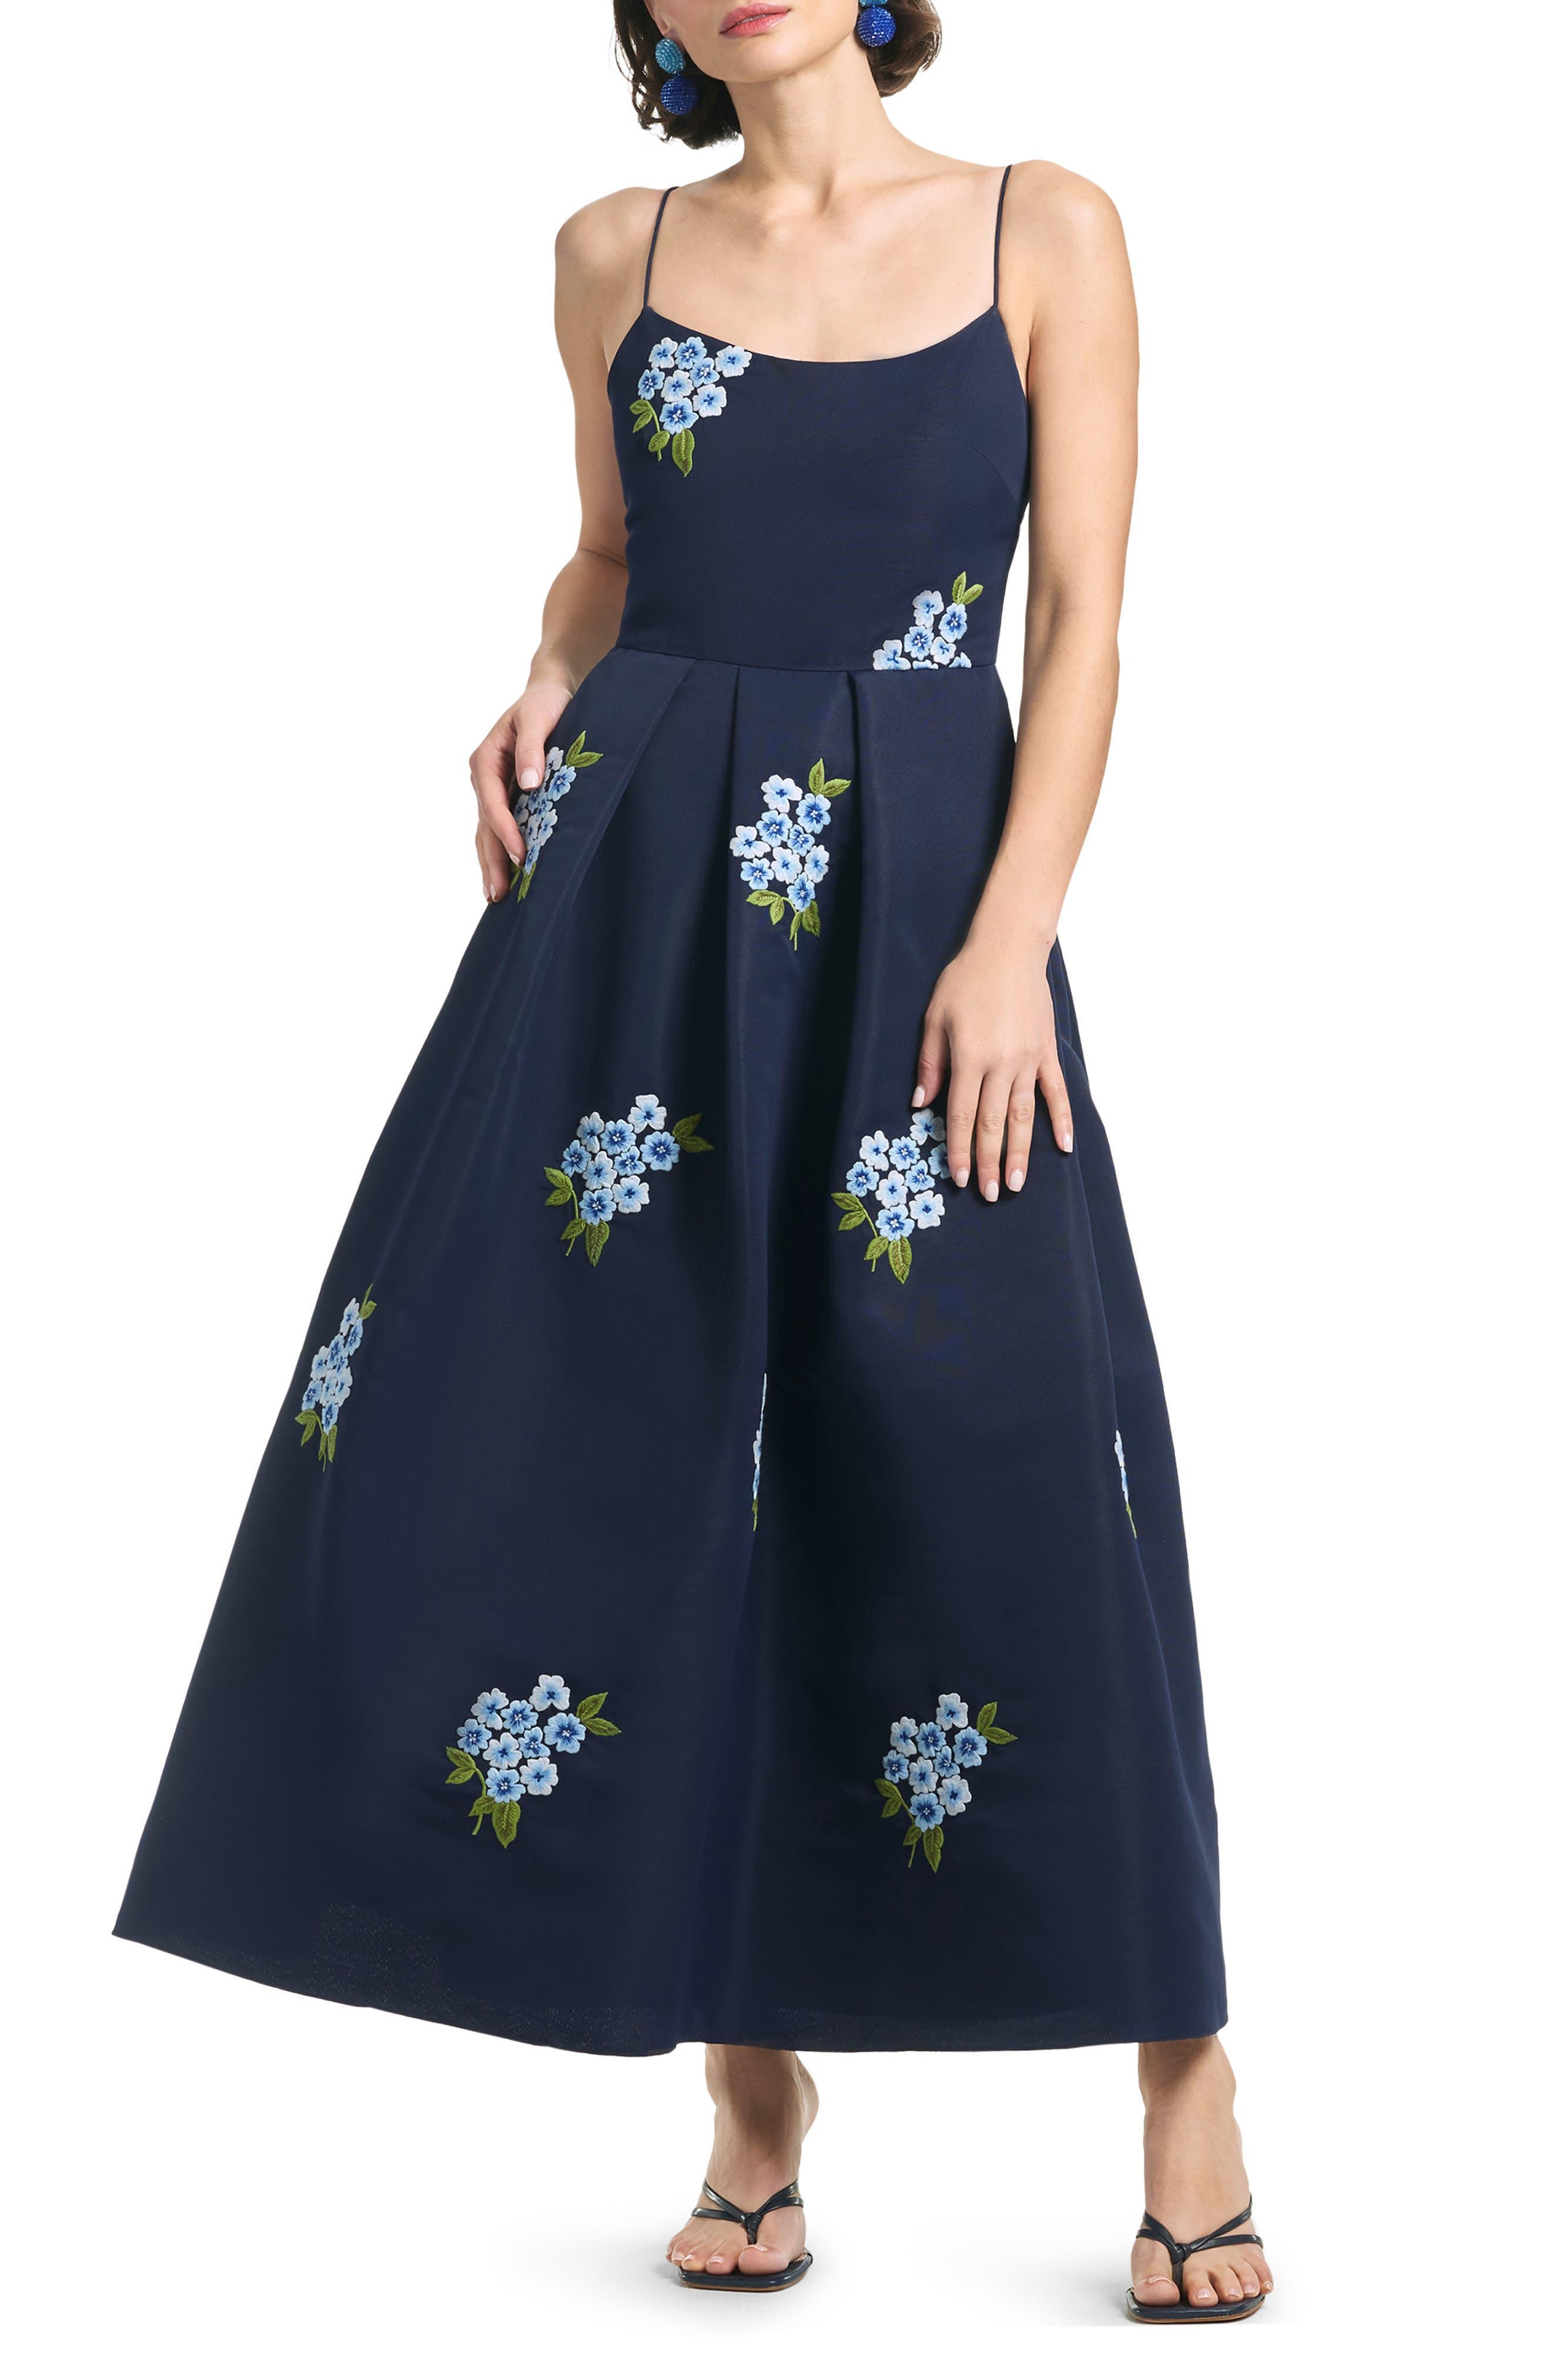 Sachin & Babi Audra Floral Embroidery Cocktail Midi Dress in Blue | Lyst